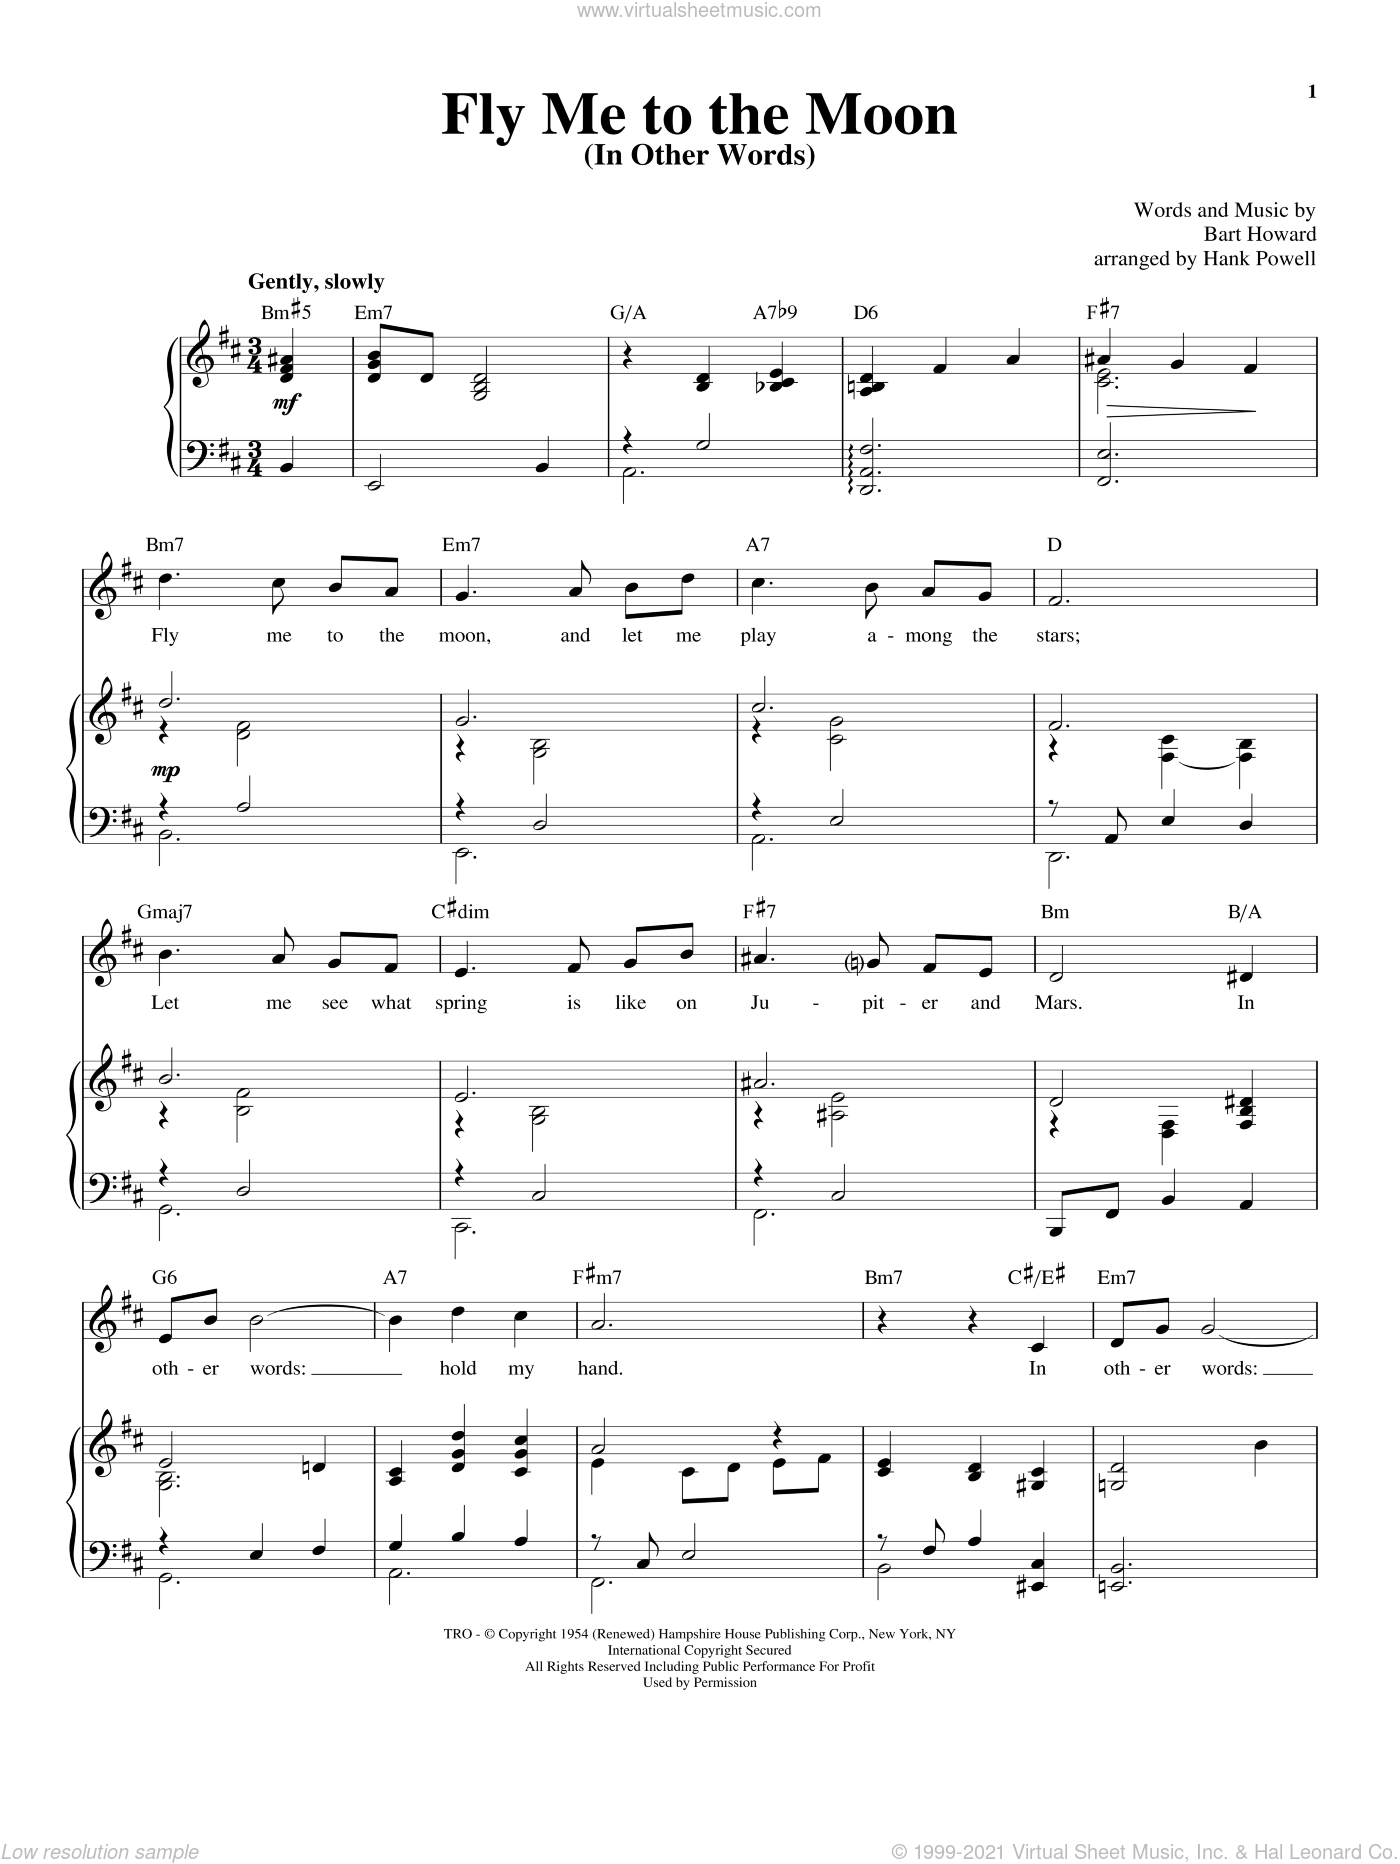 Sinatra - Fly Me To The Moon (In Other Words) sheet music for voice and